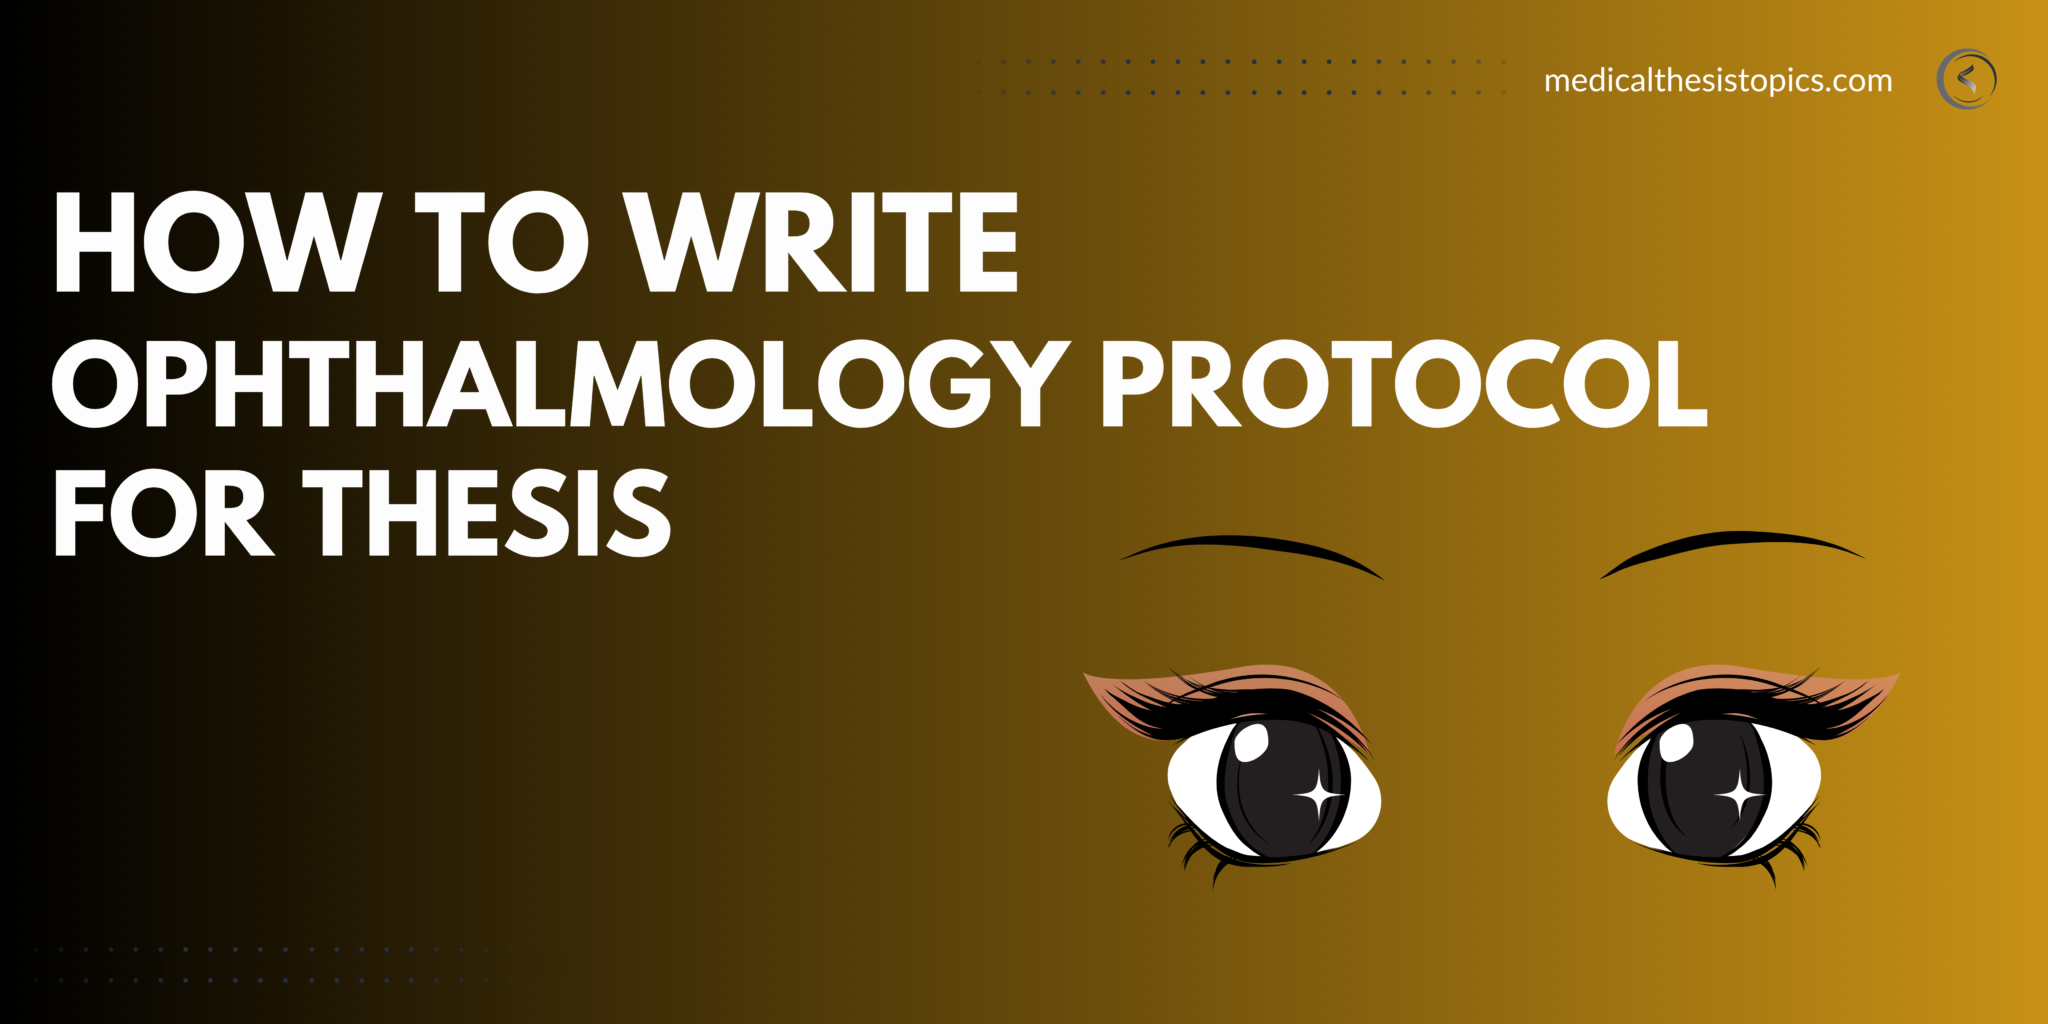 easy thesis topics in ophthalmology